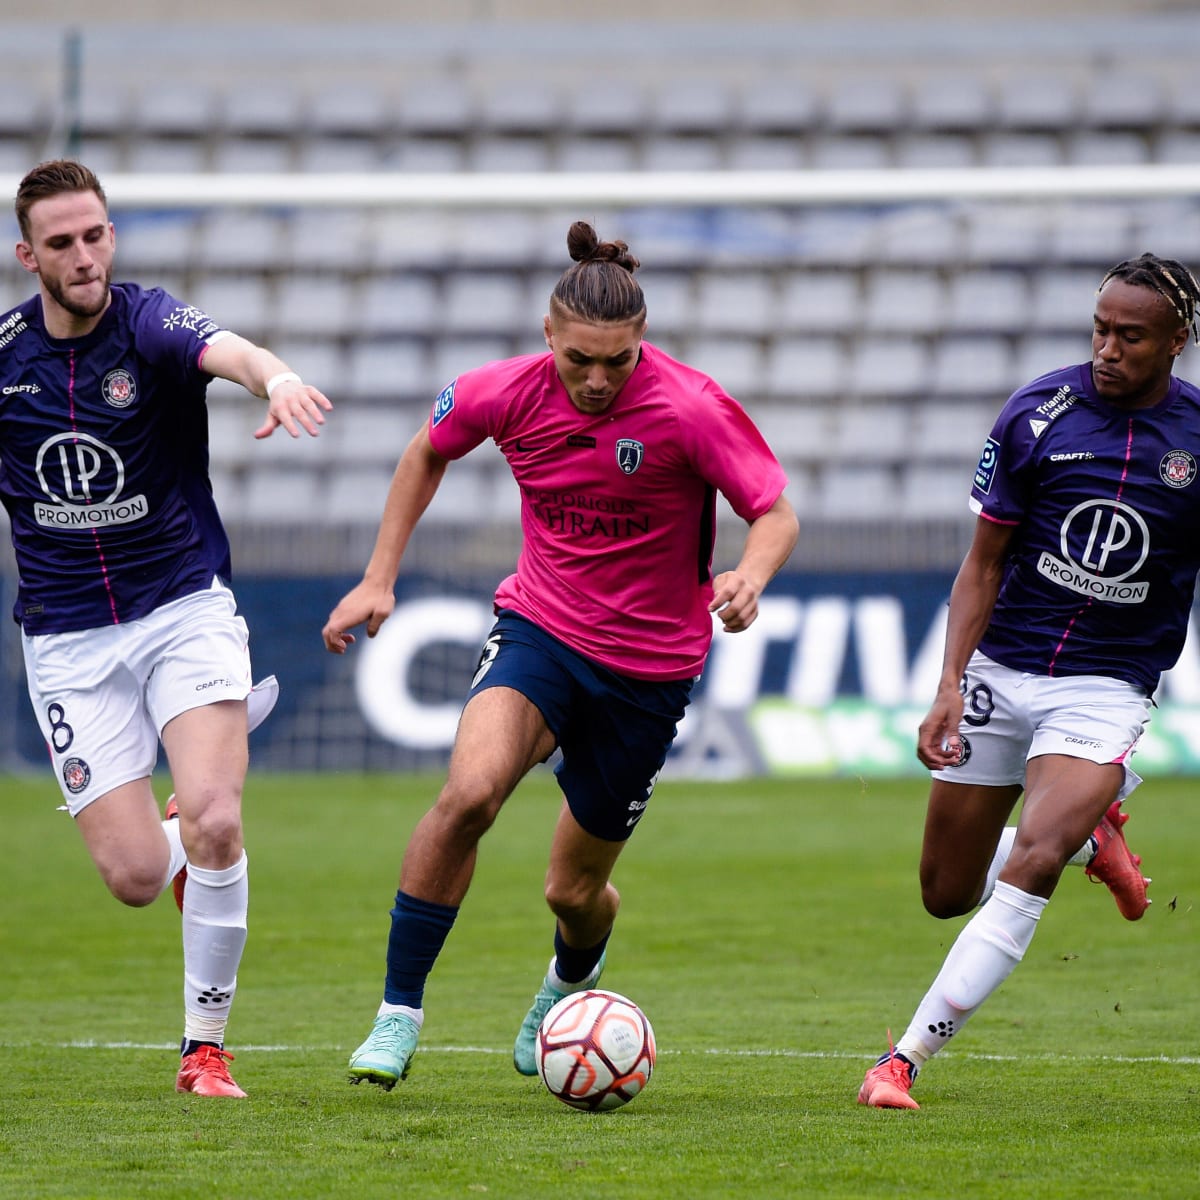 Watch Toulouse vs Clermont Stream Ligue 1 live, TV channel - How to Watch and Stream Major League and College Sports